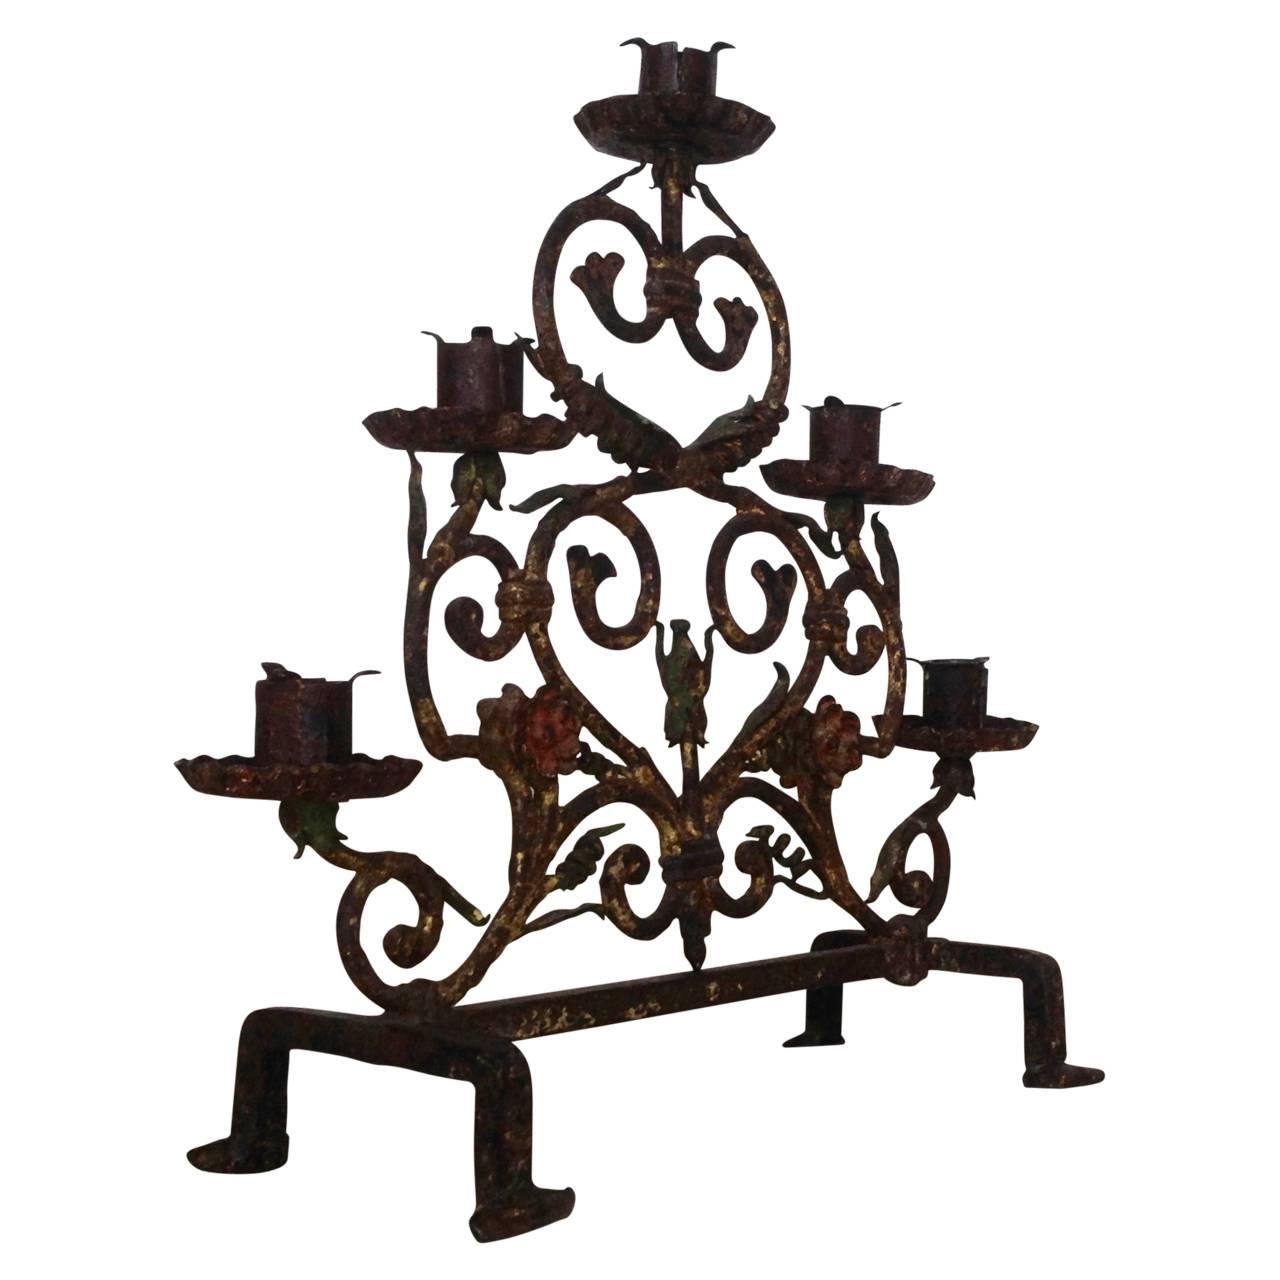 Early 19th century fireplace candelabra